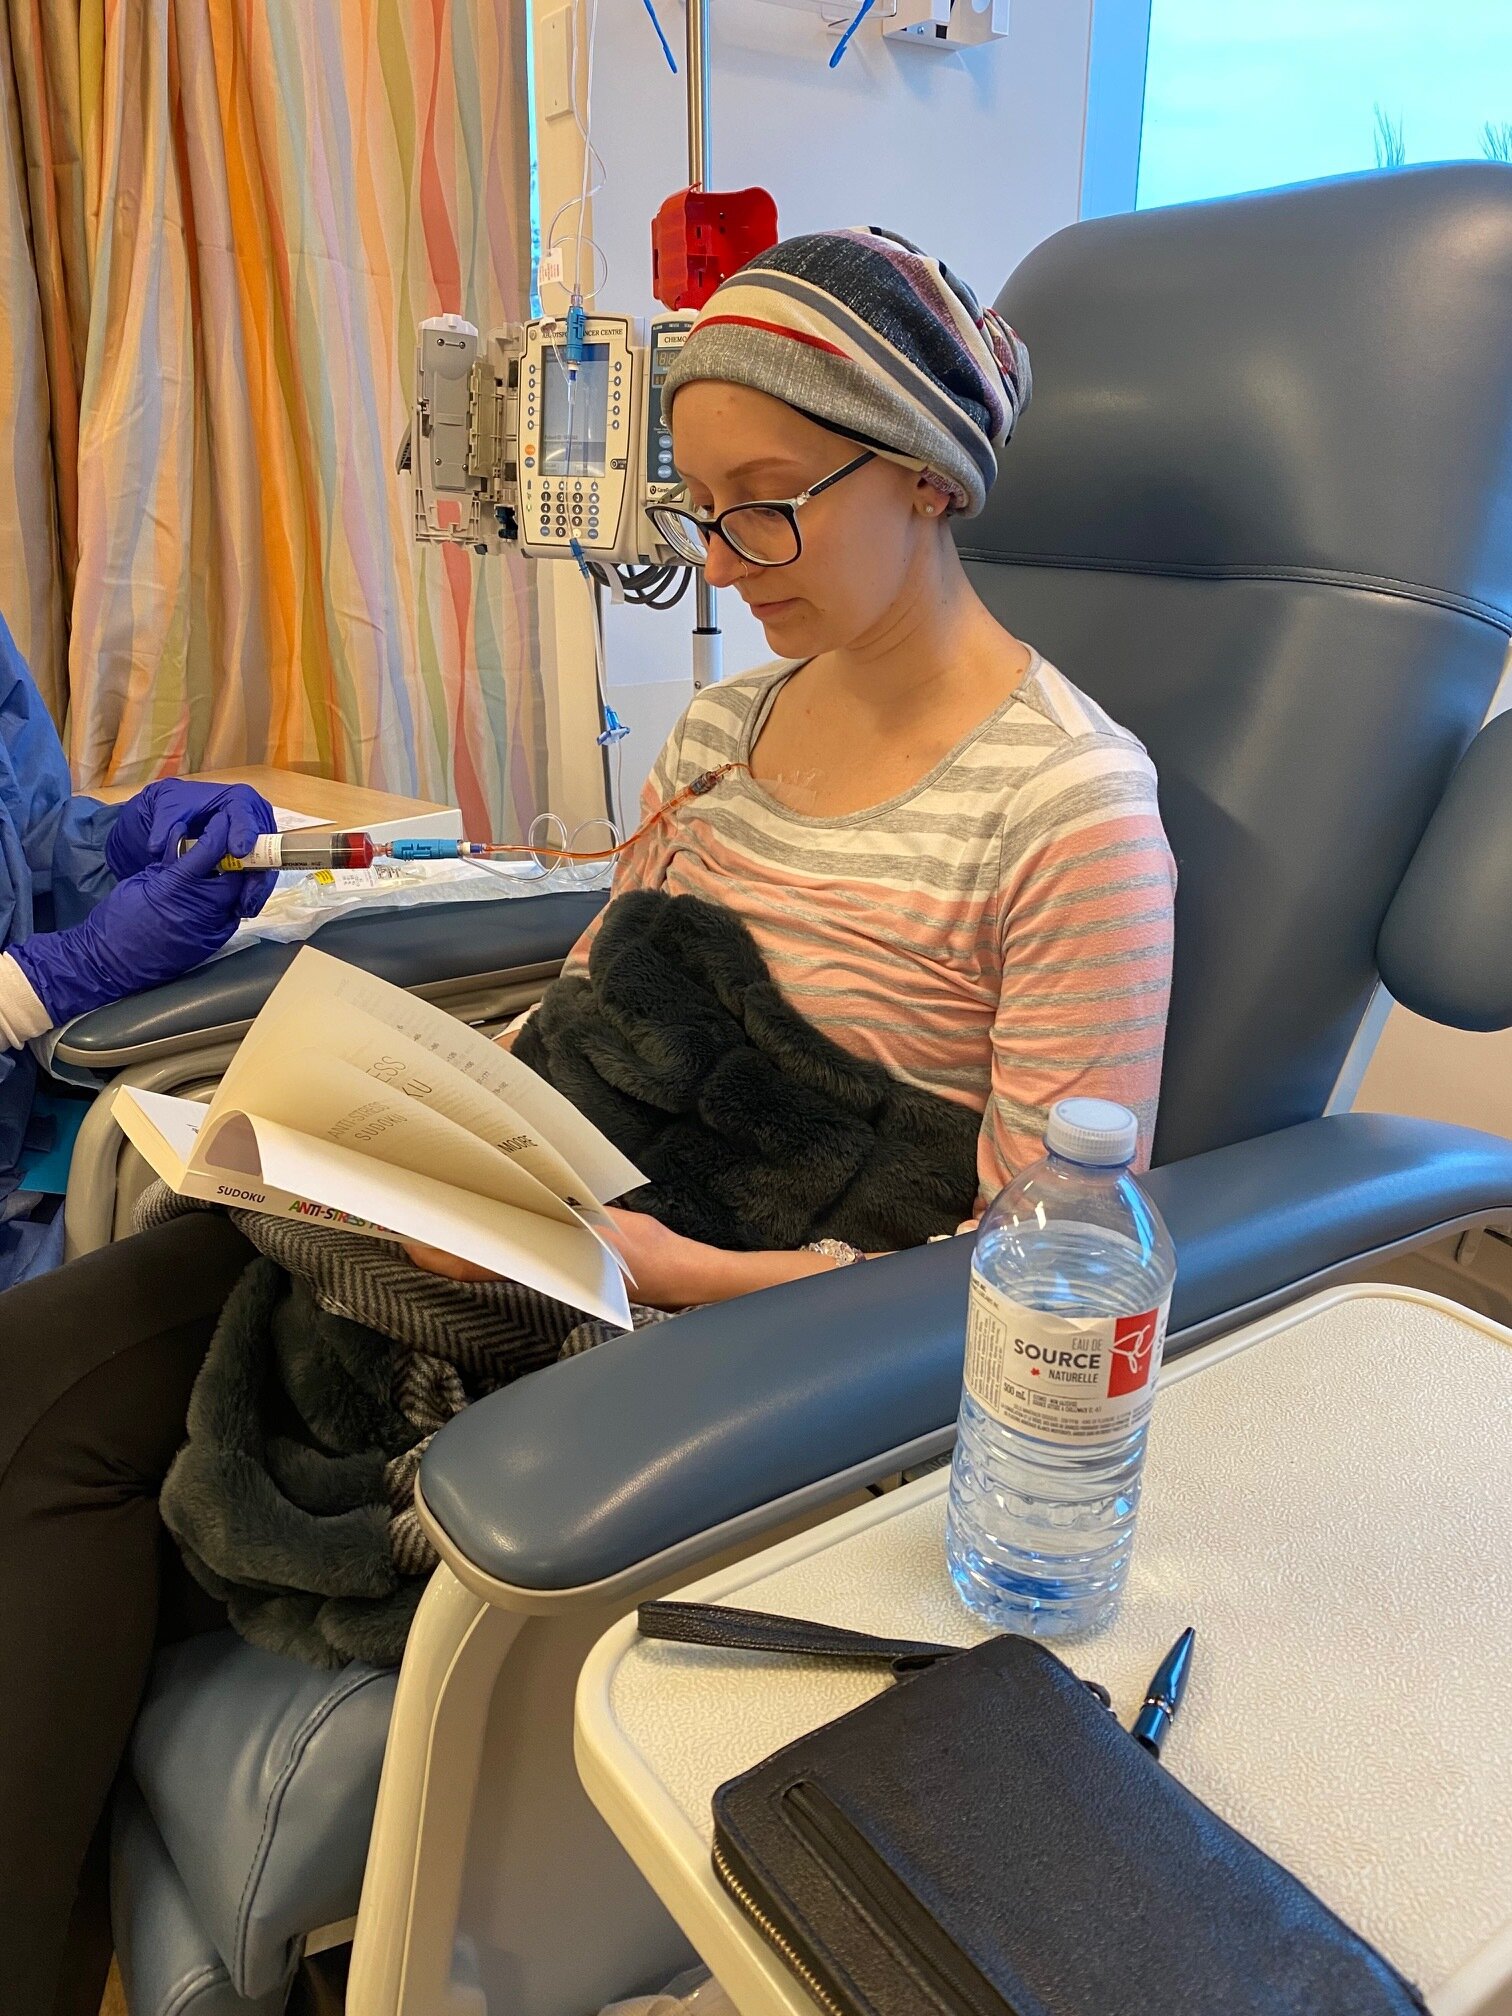 Chemo Round 3 (Using my Port for the 2nd time!) â€” She Stays Strong